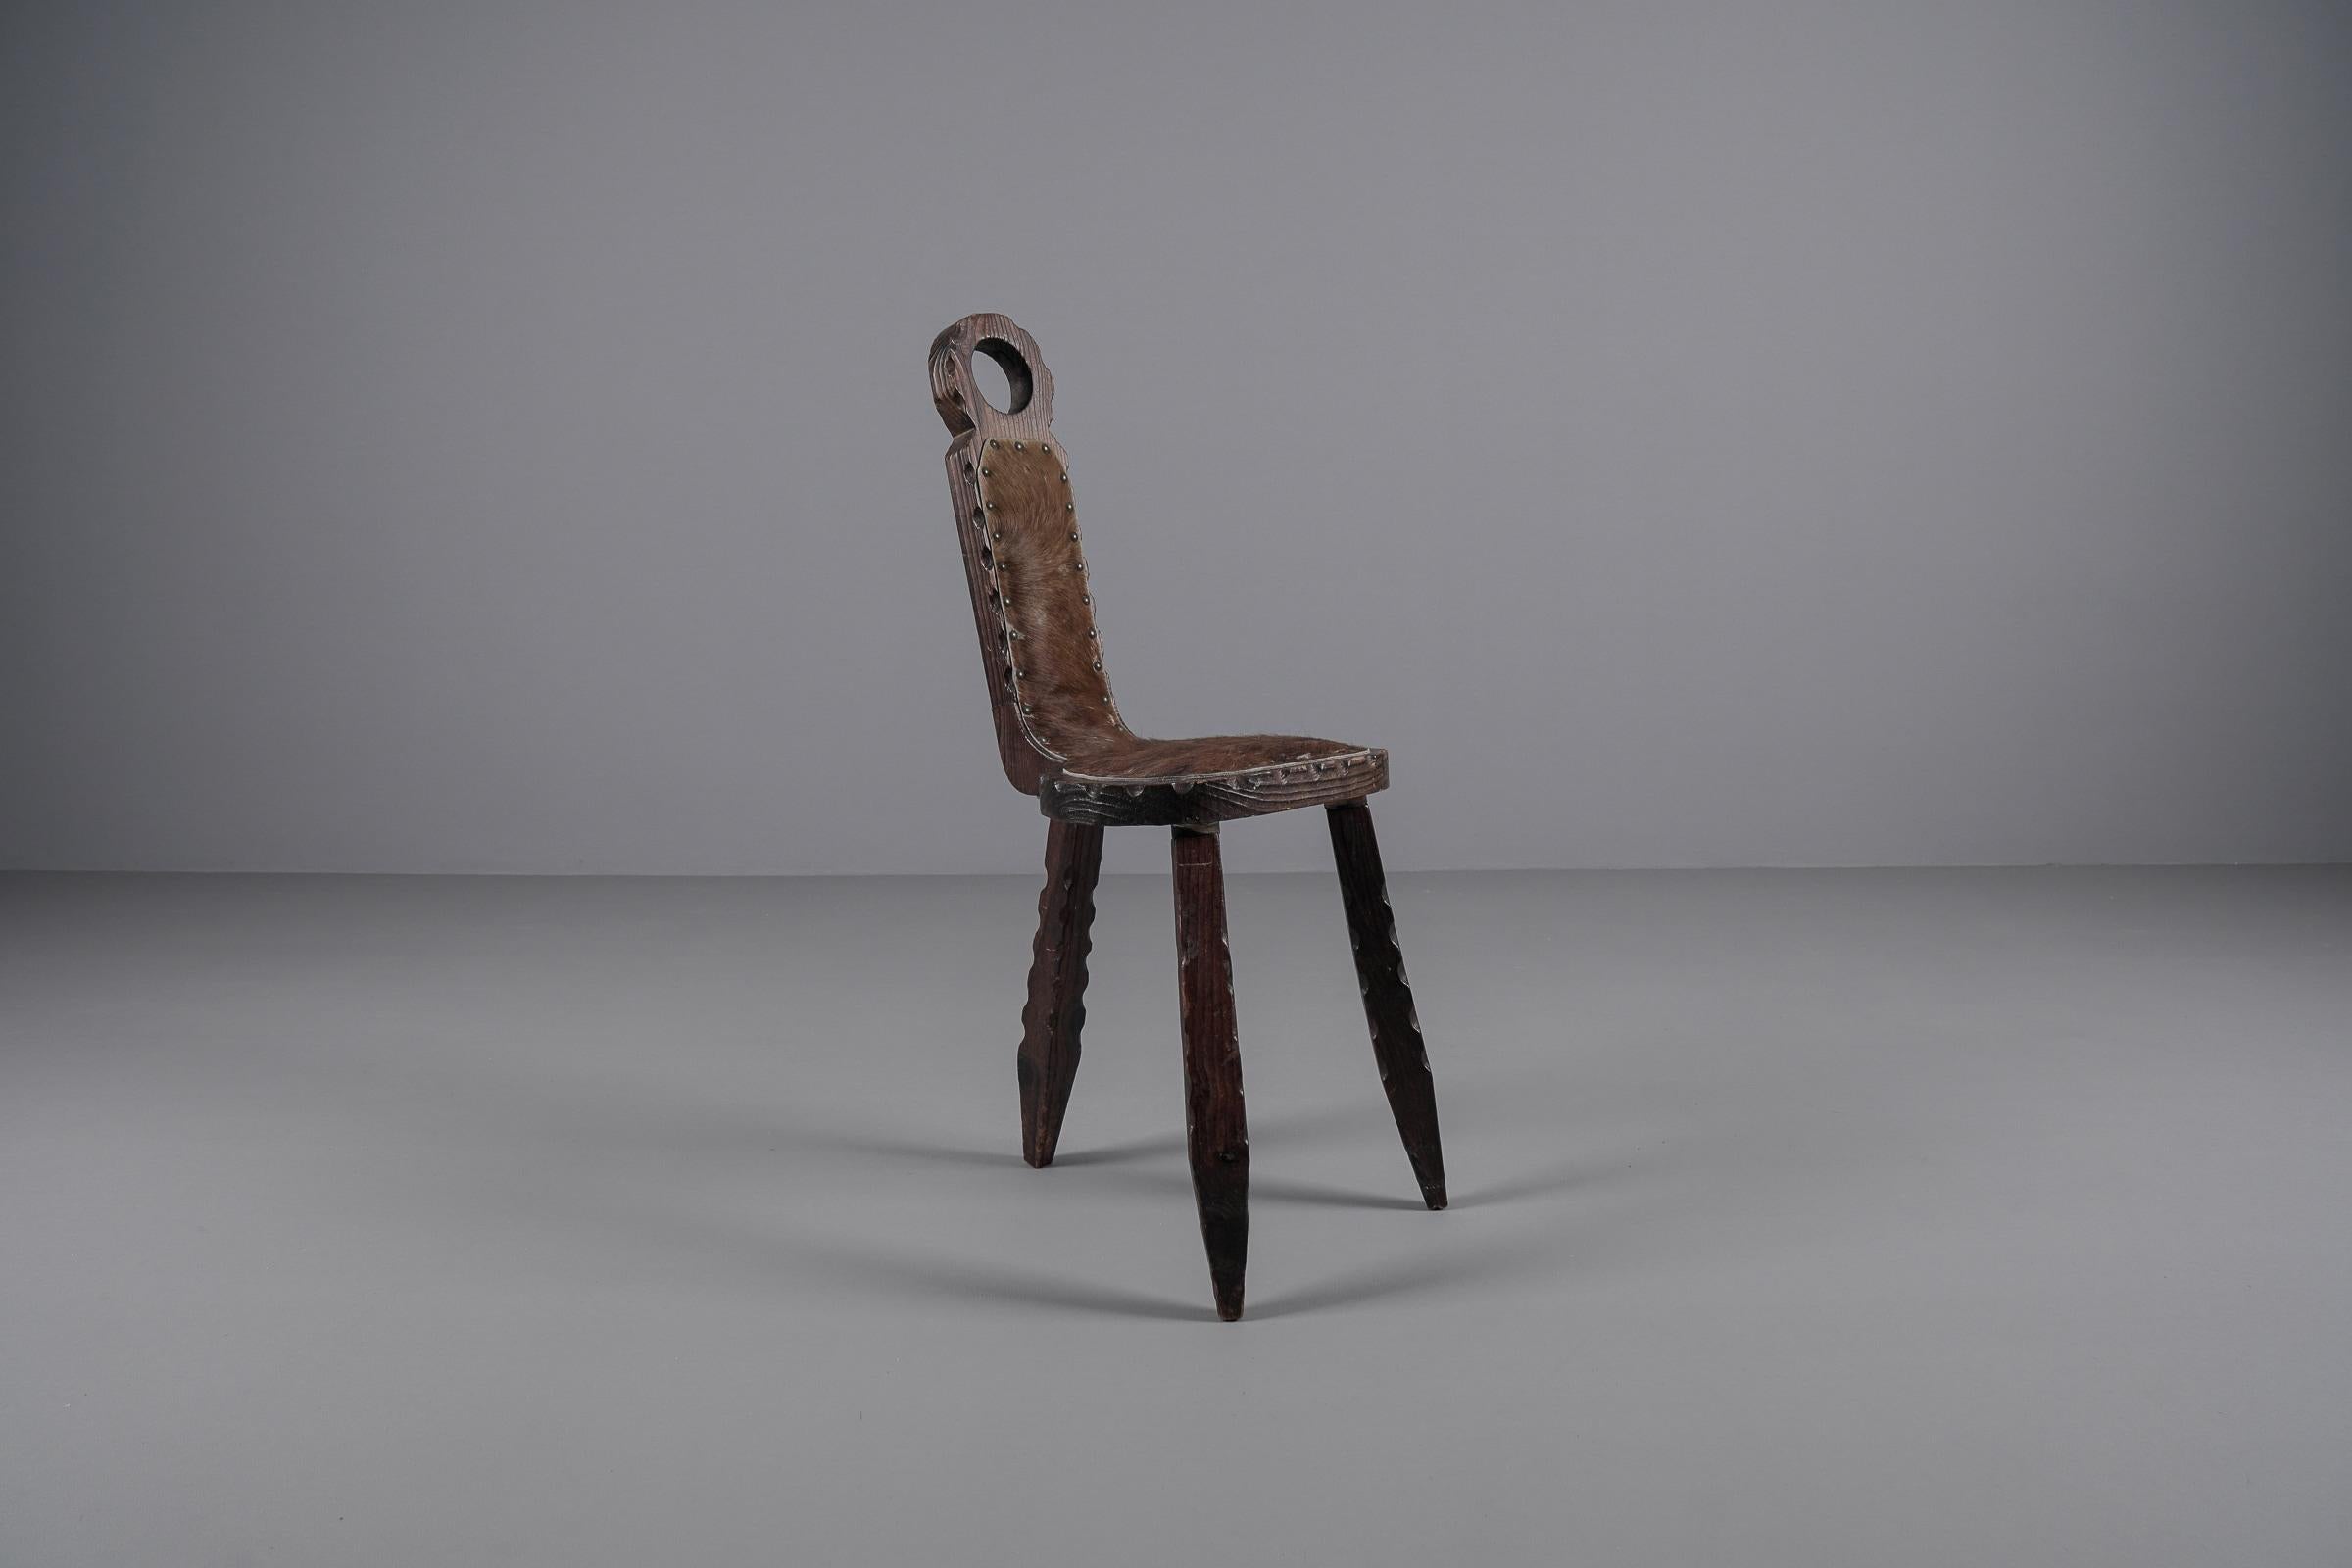 French 3-Legged Brutalist Rustic Modern Sculptured Chair, 1960s France For Sale